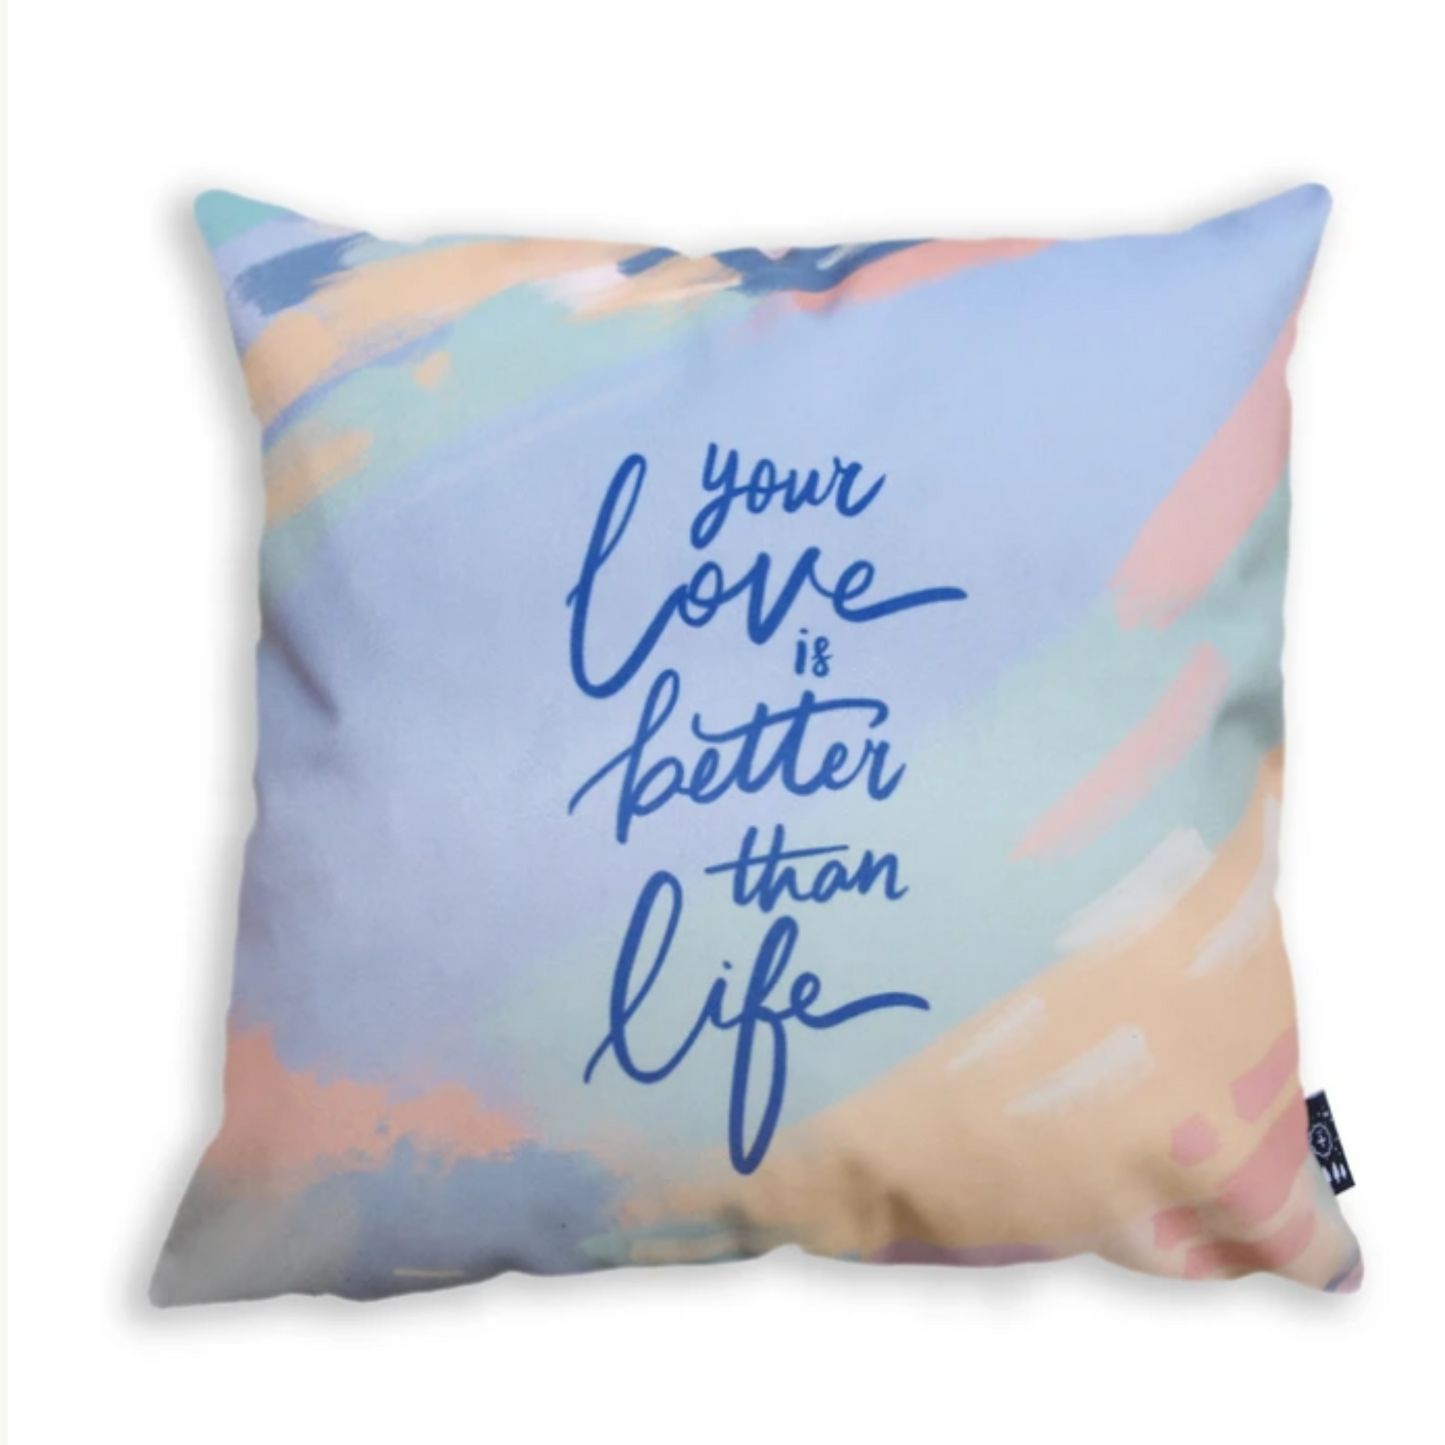 Better Than Life - Cushion Cover